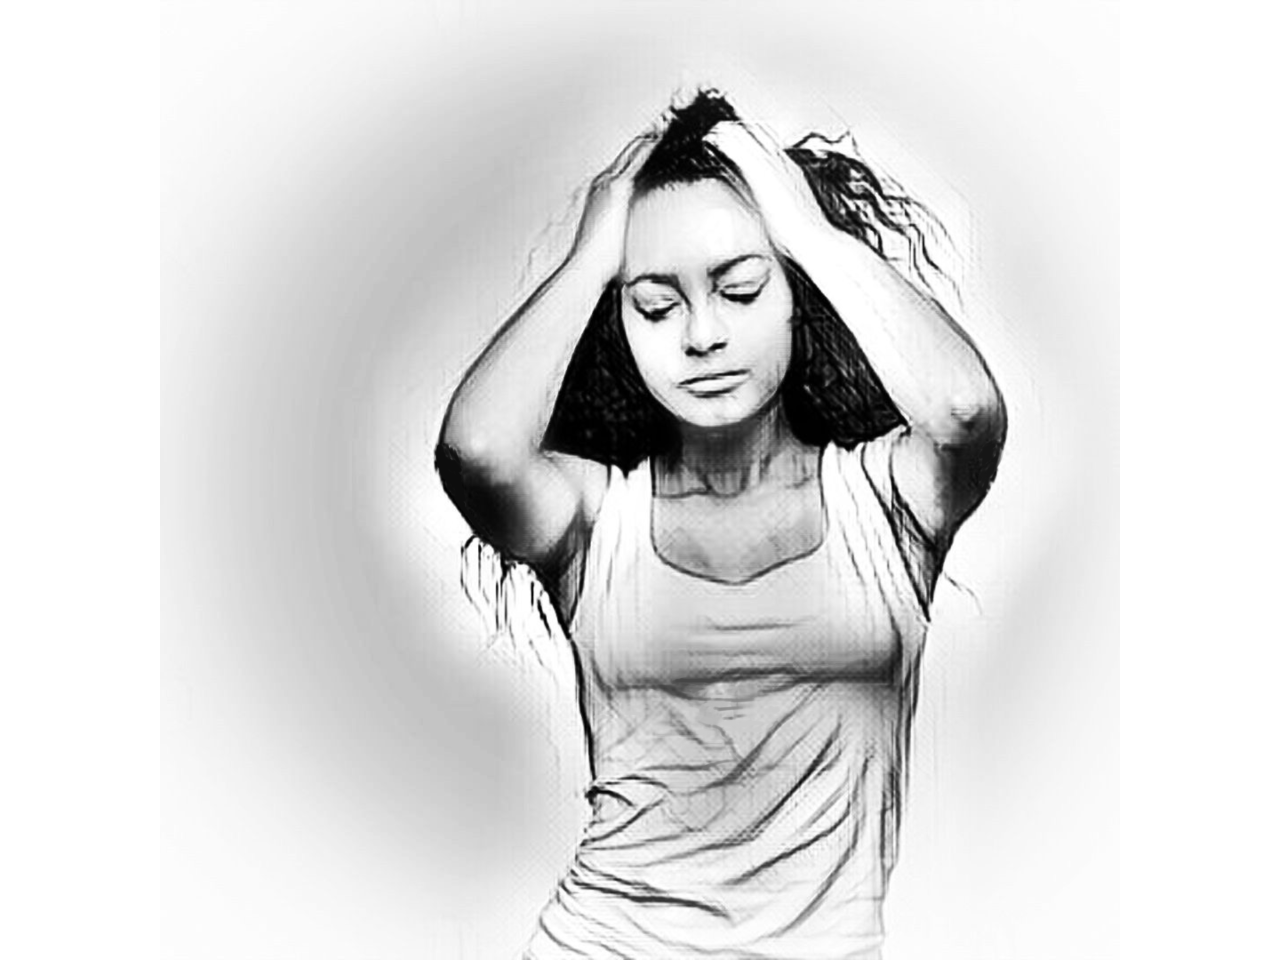 A black and white digital illustration of a woman with her eyes closed, scrunching the top of her head and hair with both hands. She has fair skin, long black wavy hair, and is wearing a white tank top.